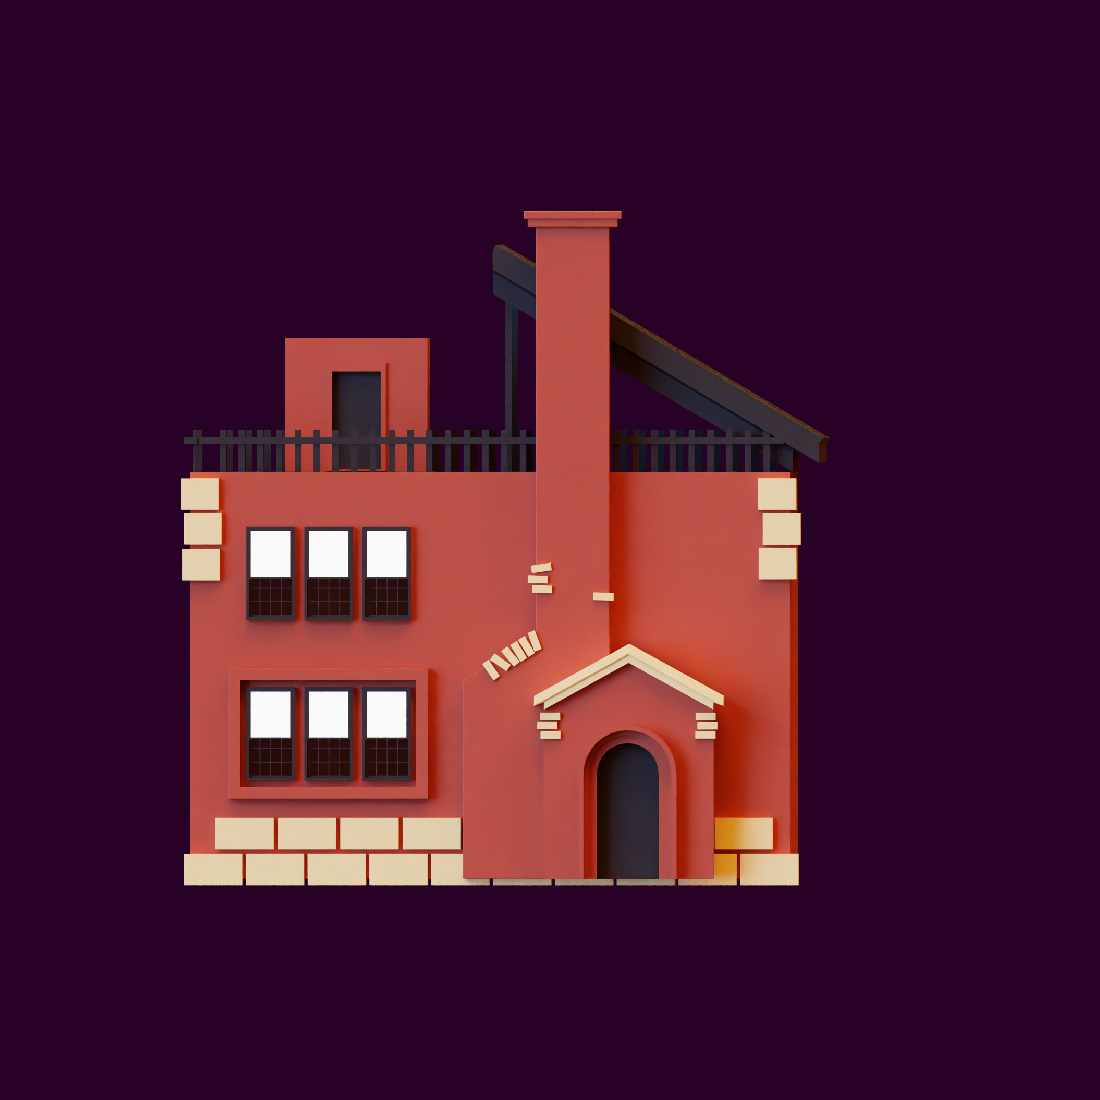 3D HOUSE BUILDING LOWPOLY RENDER from different view preview image.